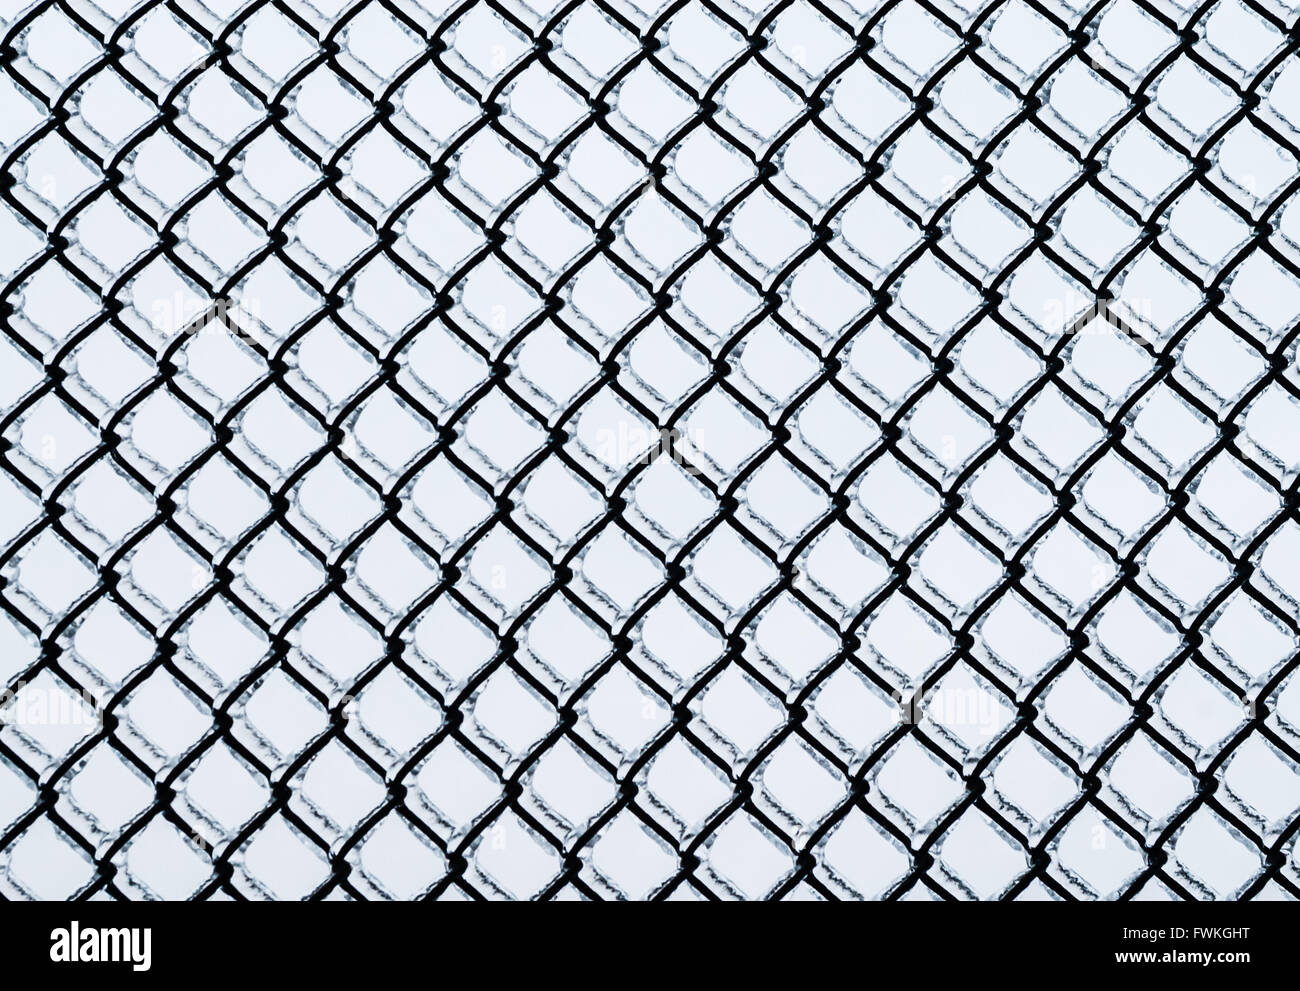 Black medium chain-link fence covered in ice on white background. Stock Photo